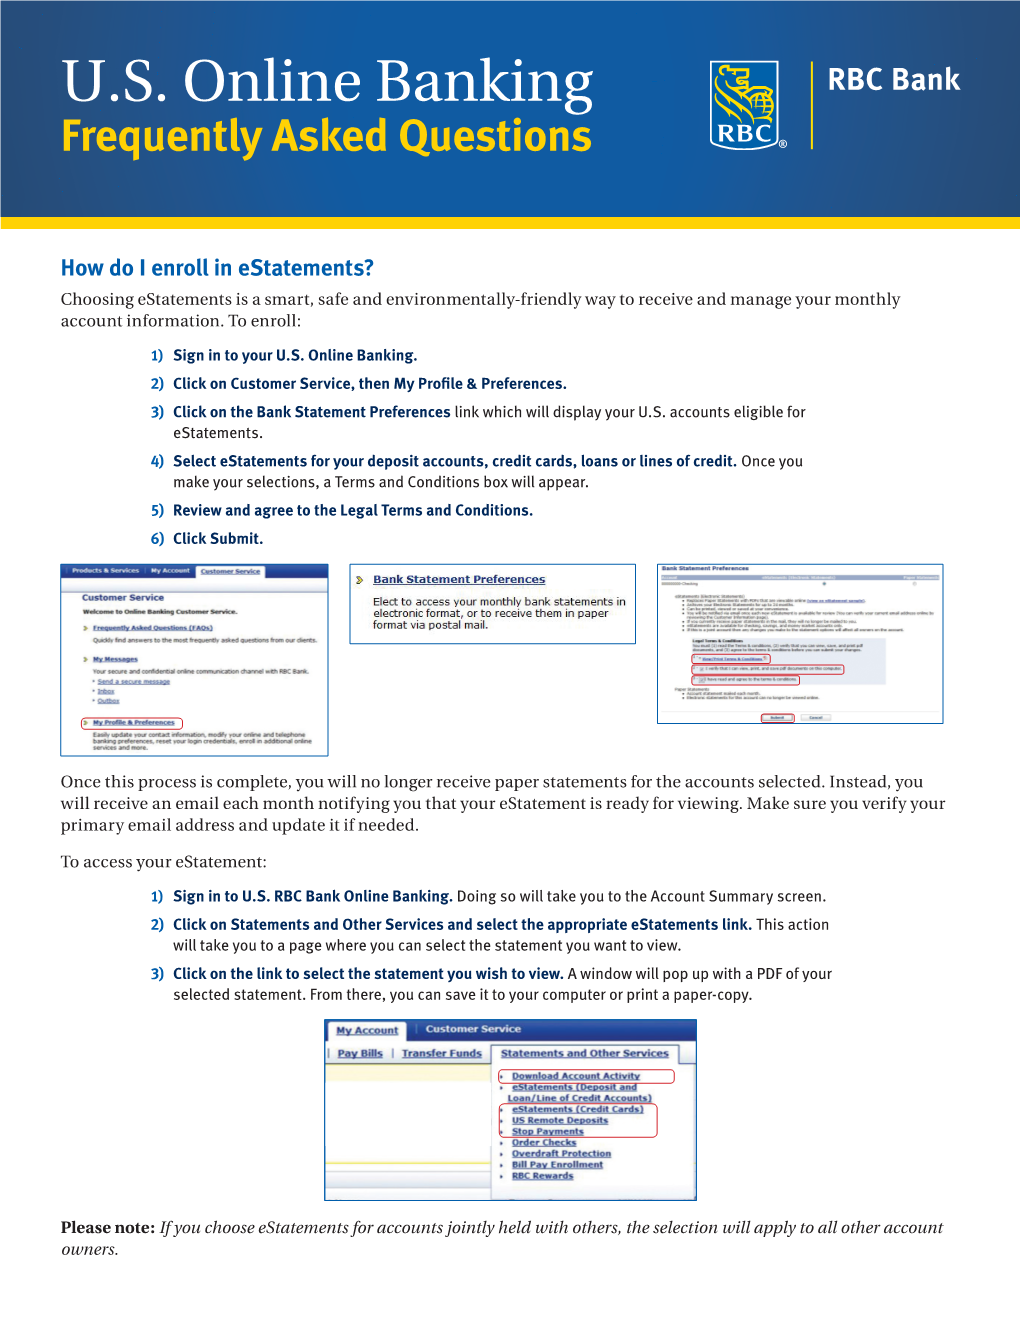 U.S. Online Banking Frequently Asked Questions